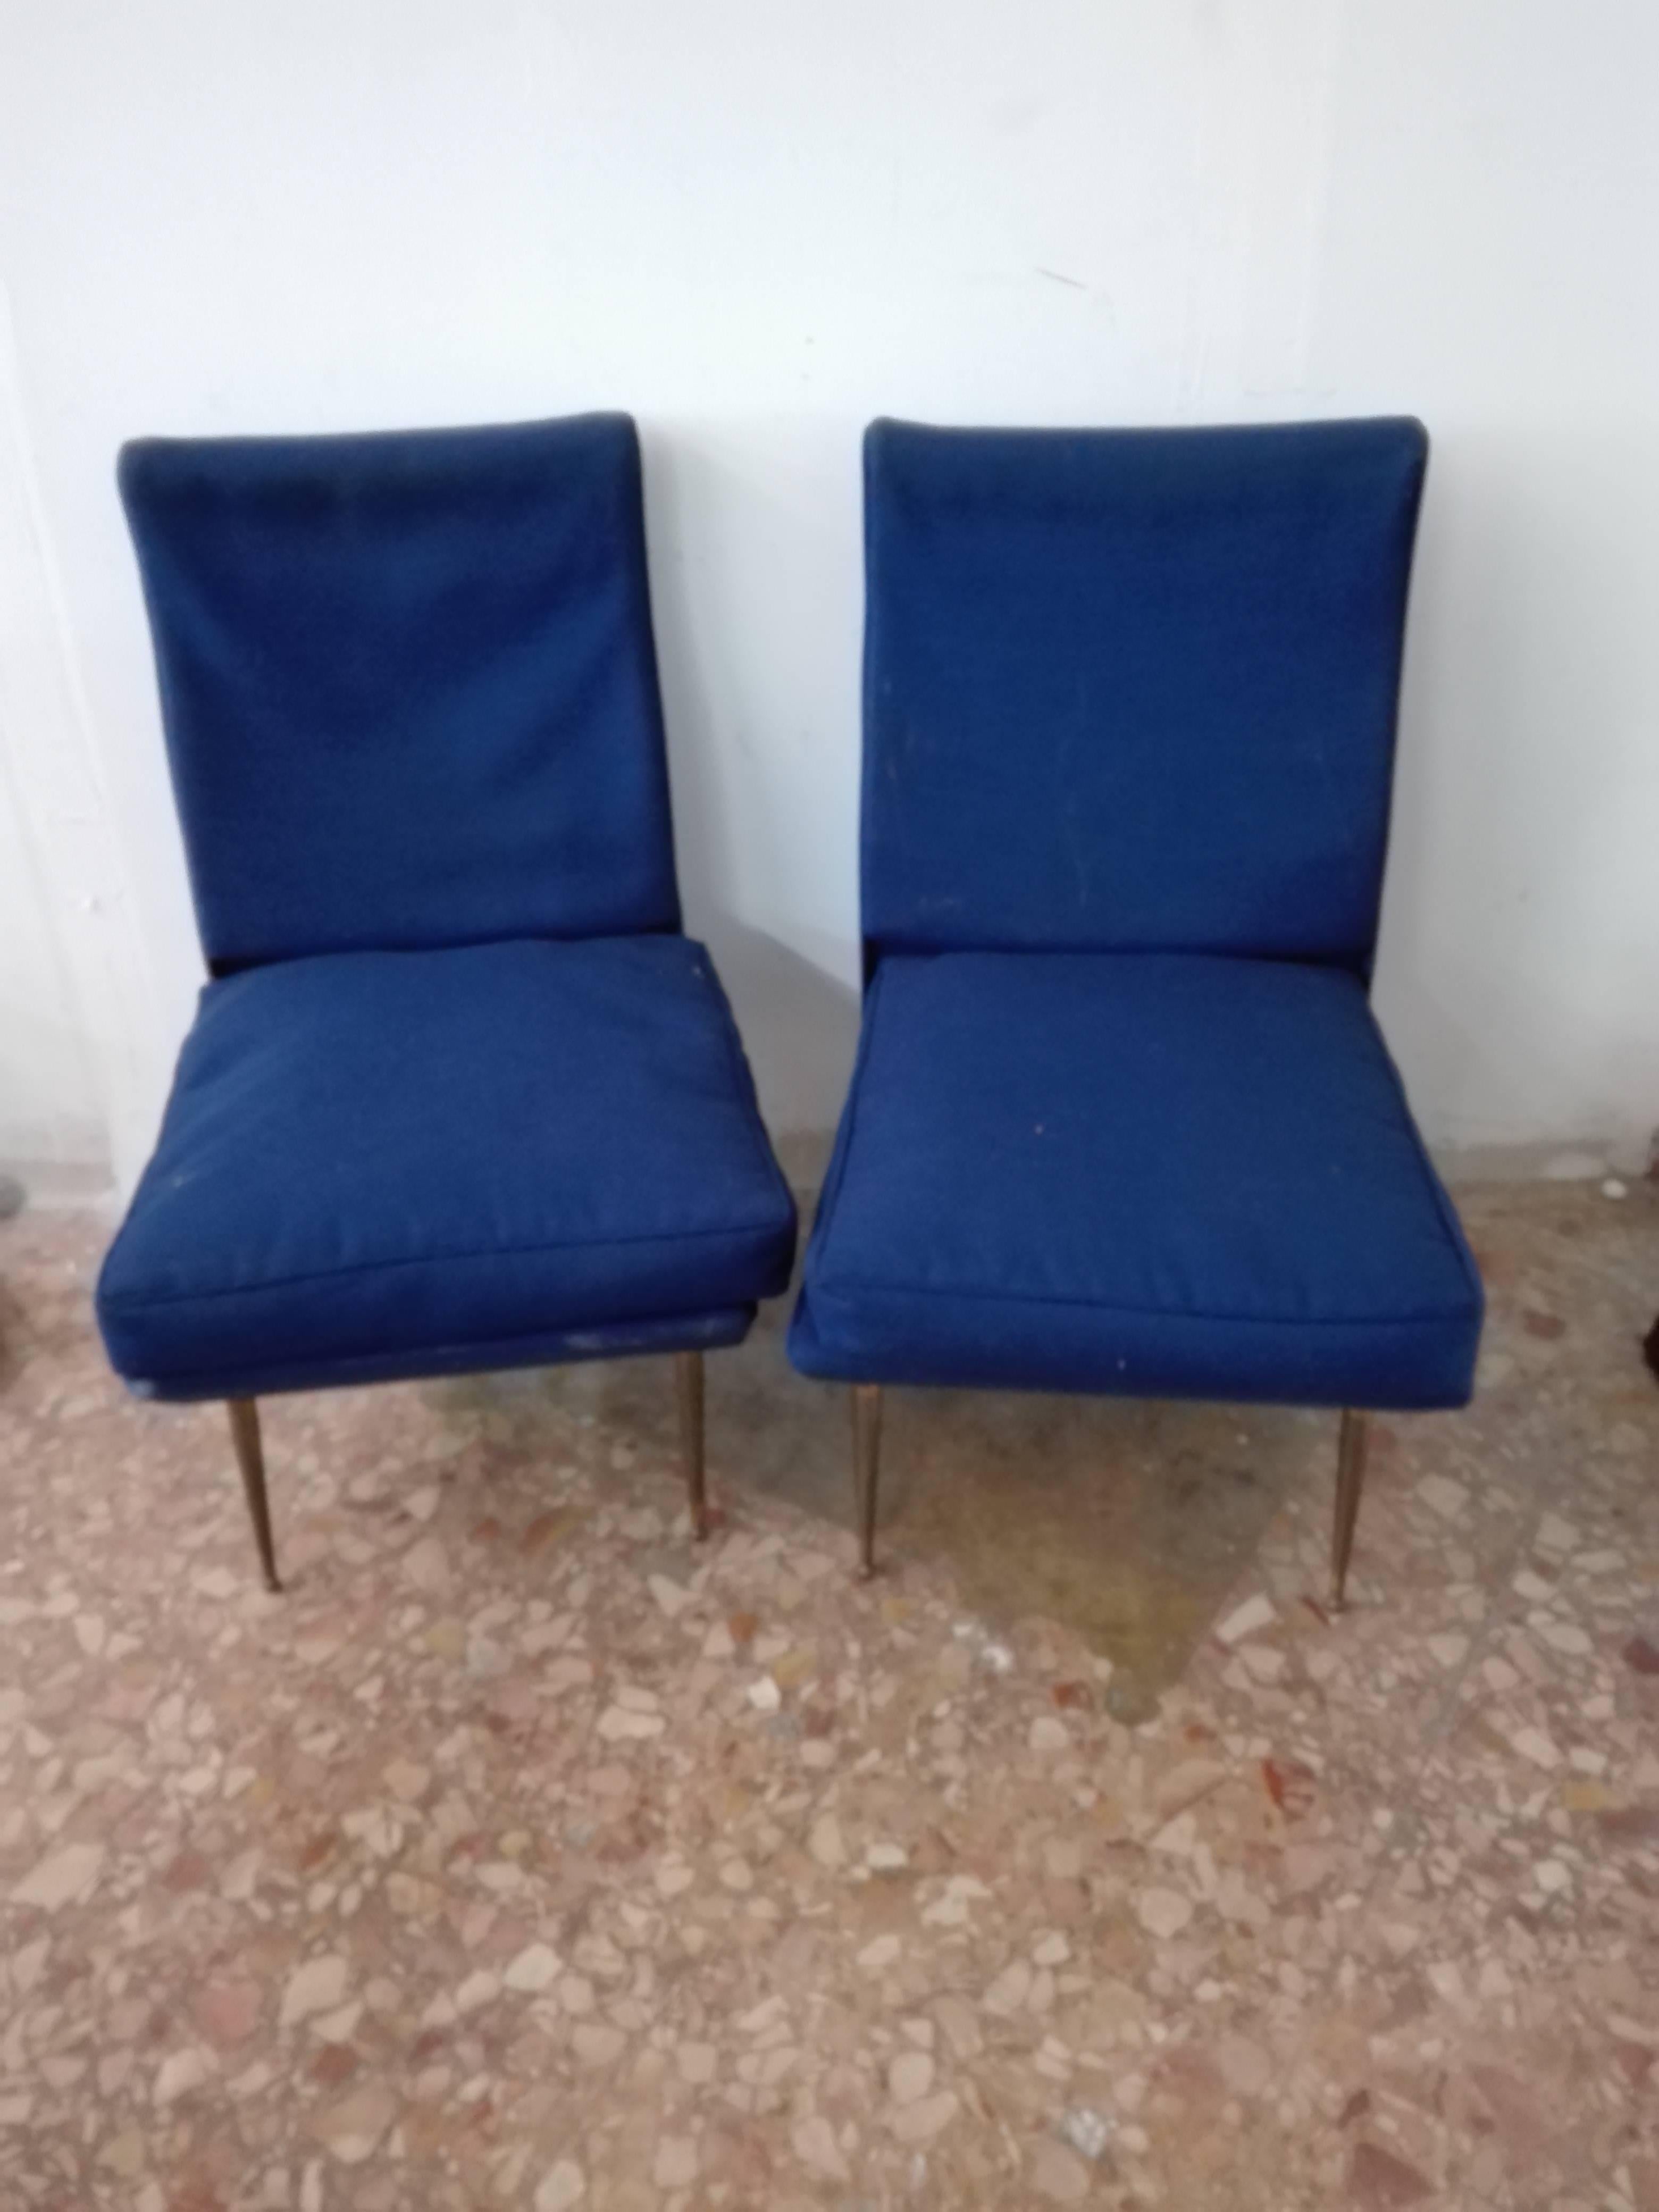 A pair of chairs, fabric upholstery, metal legs. Produced in Italy, in the 1950s.